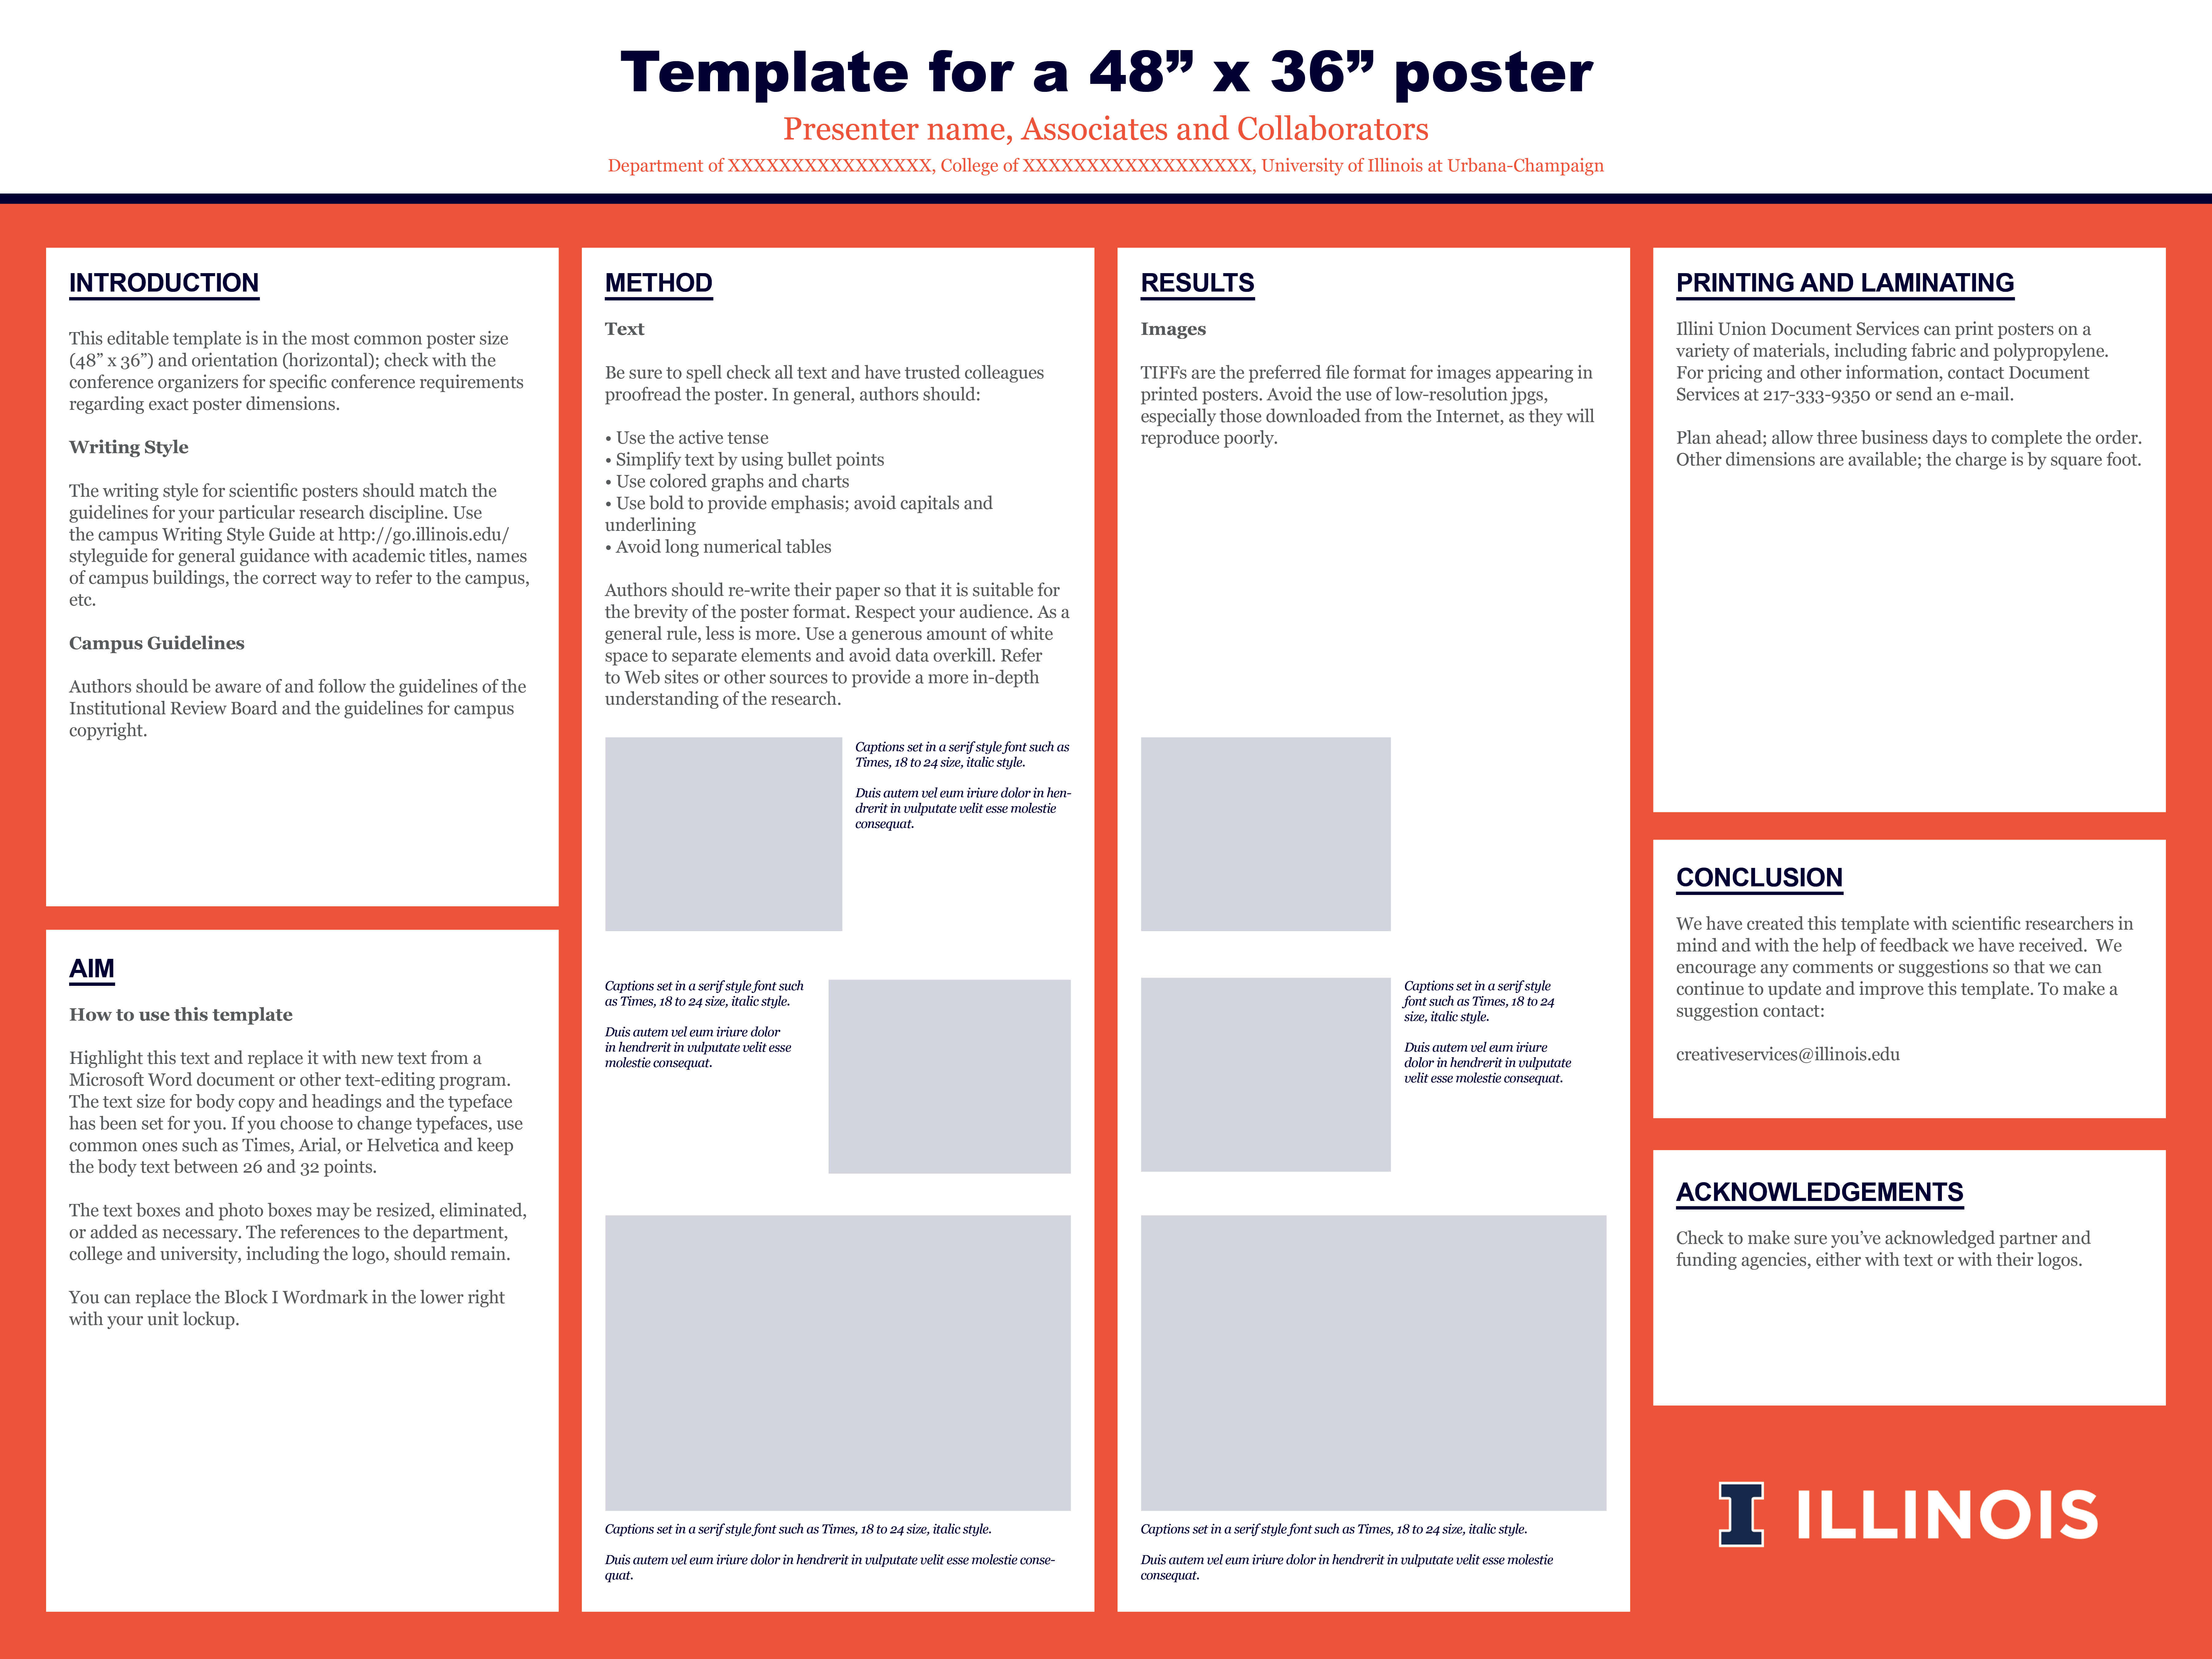 Research Poster | Campus Templates | Public Affairs | Illinois With Powerpoint Presentation Template Size